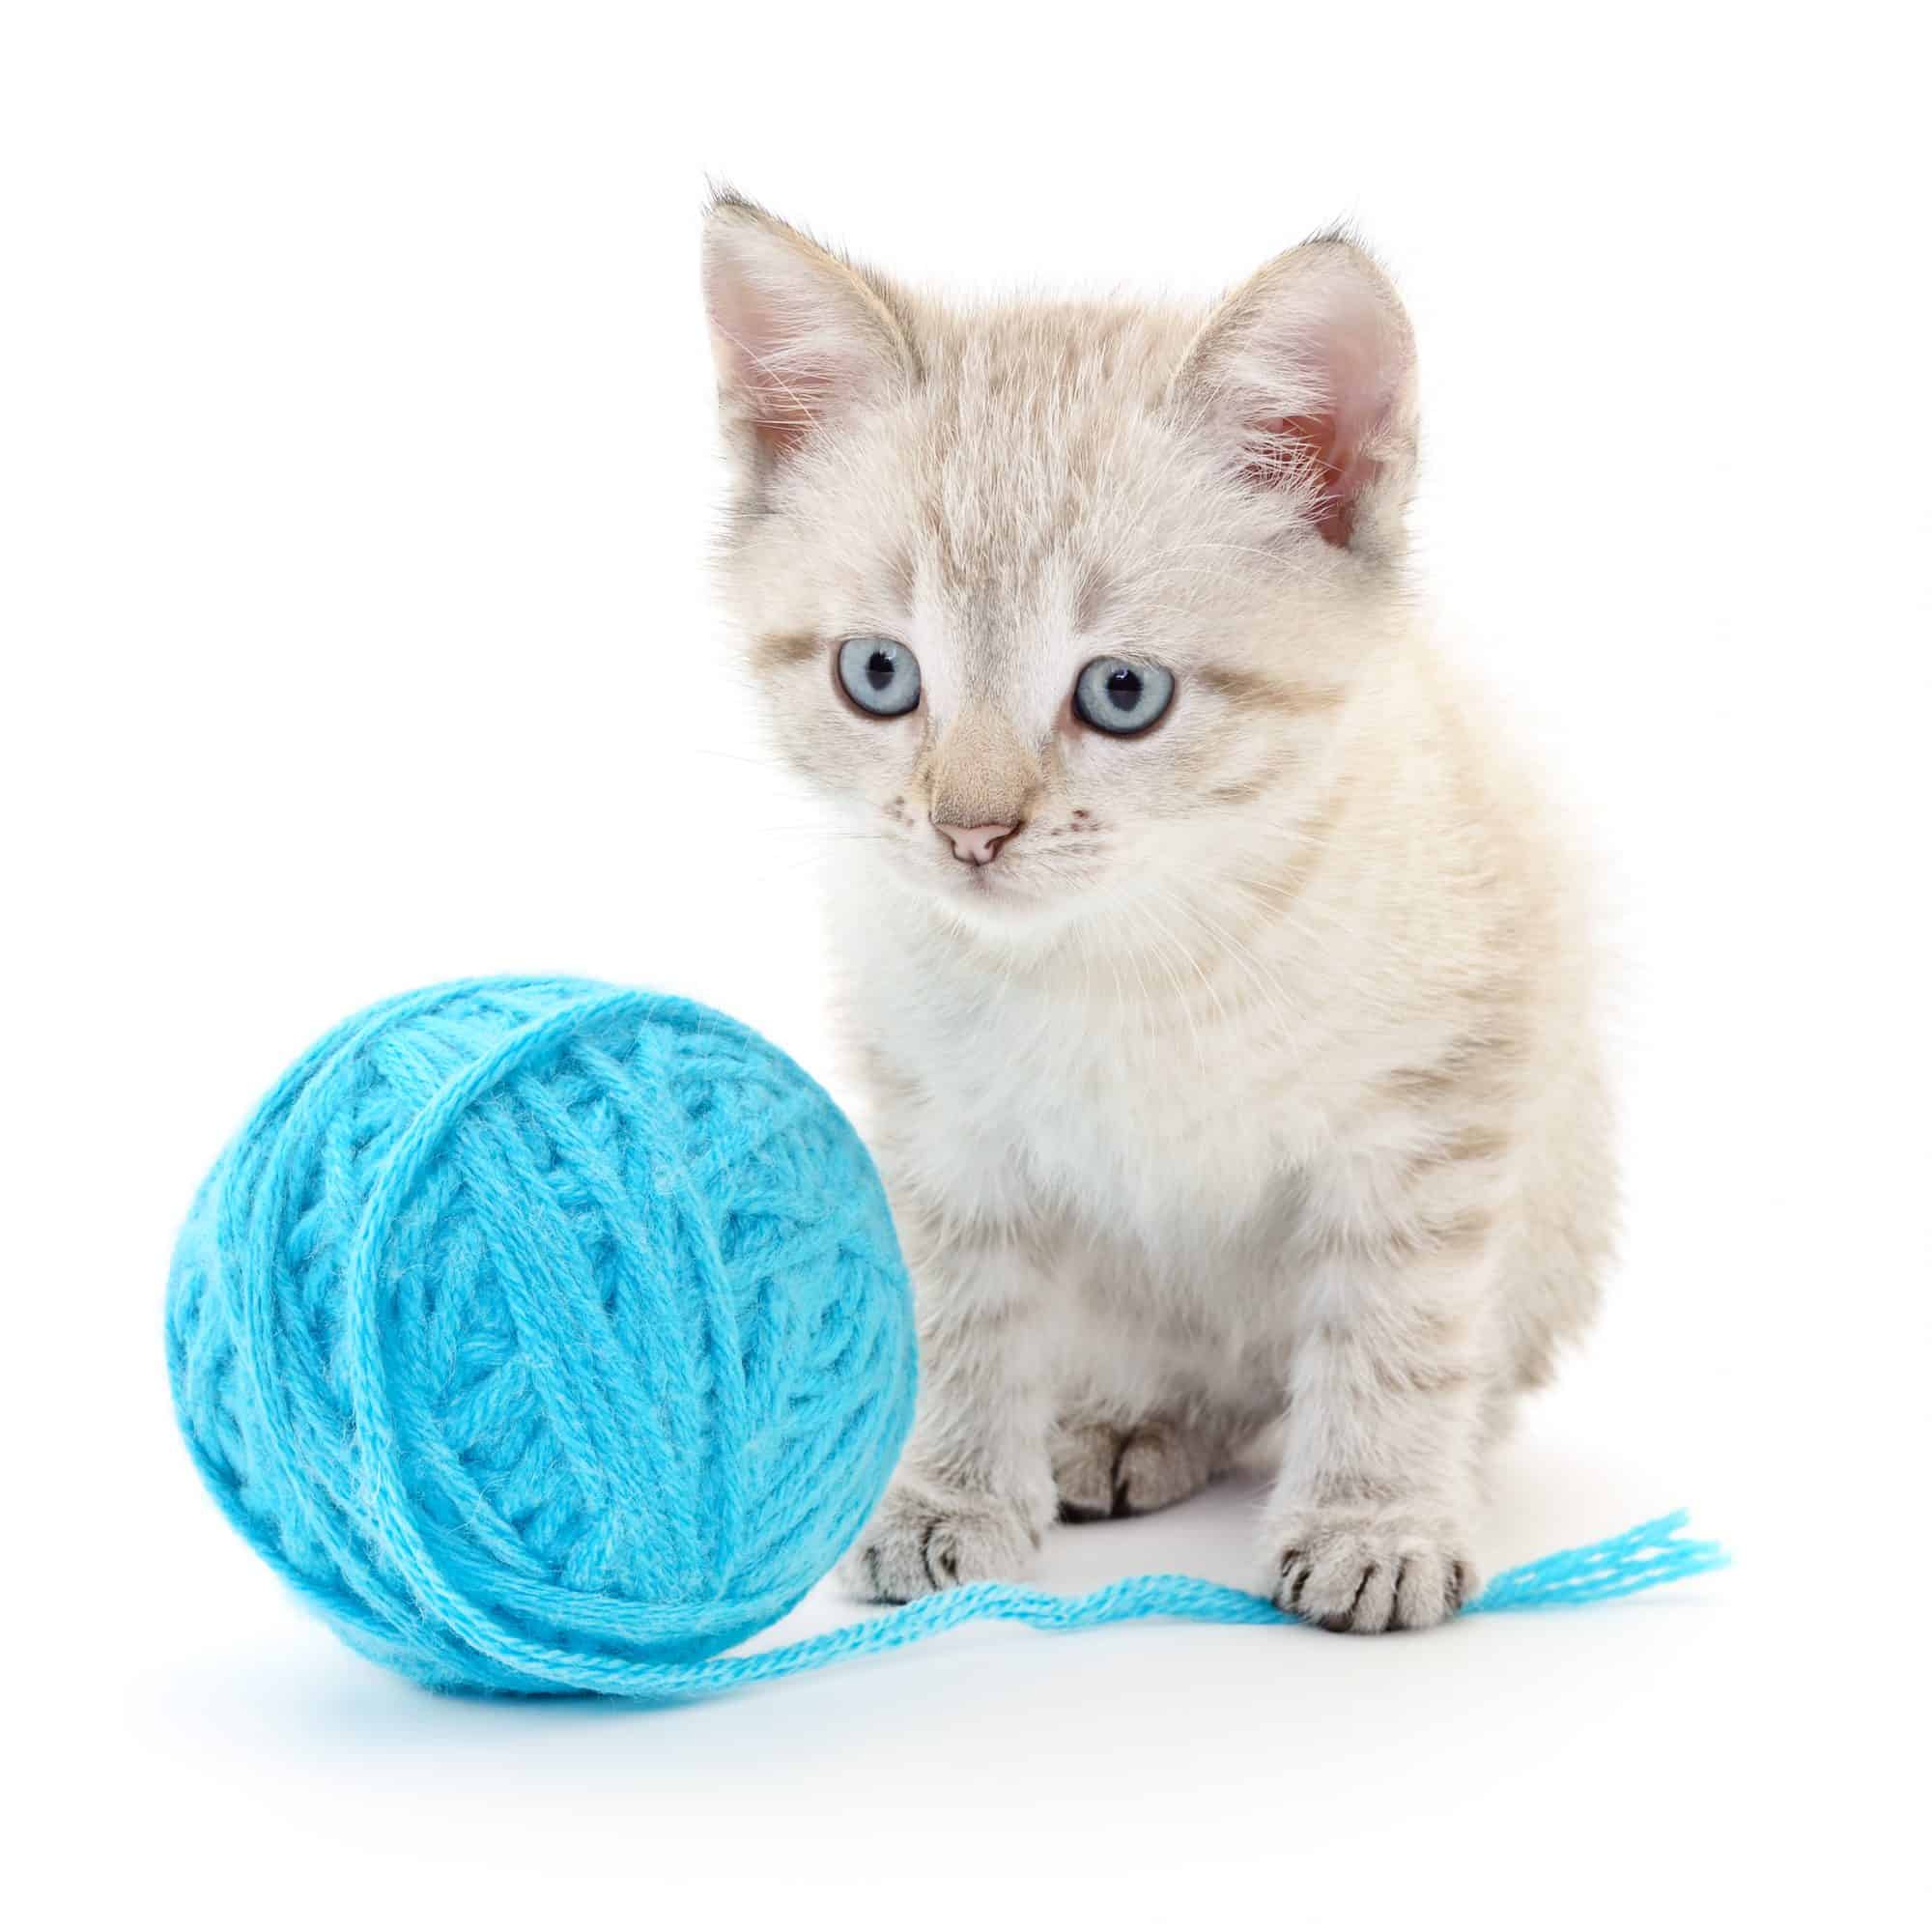 Cat playing with yarn.